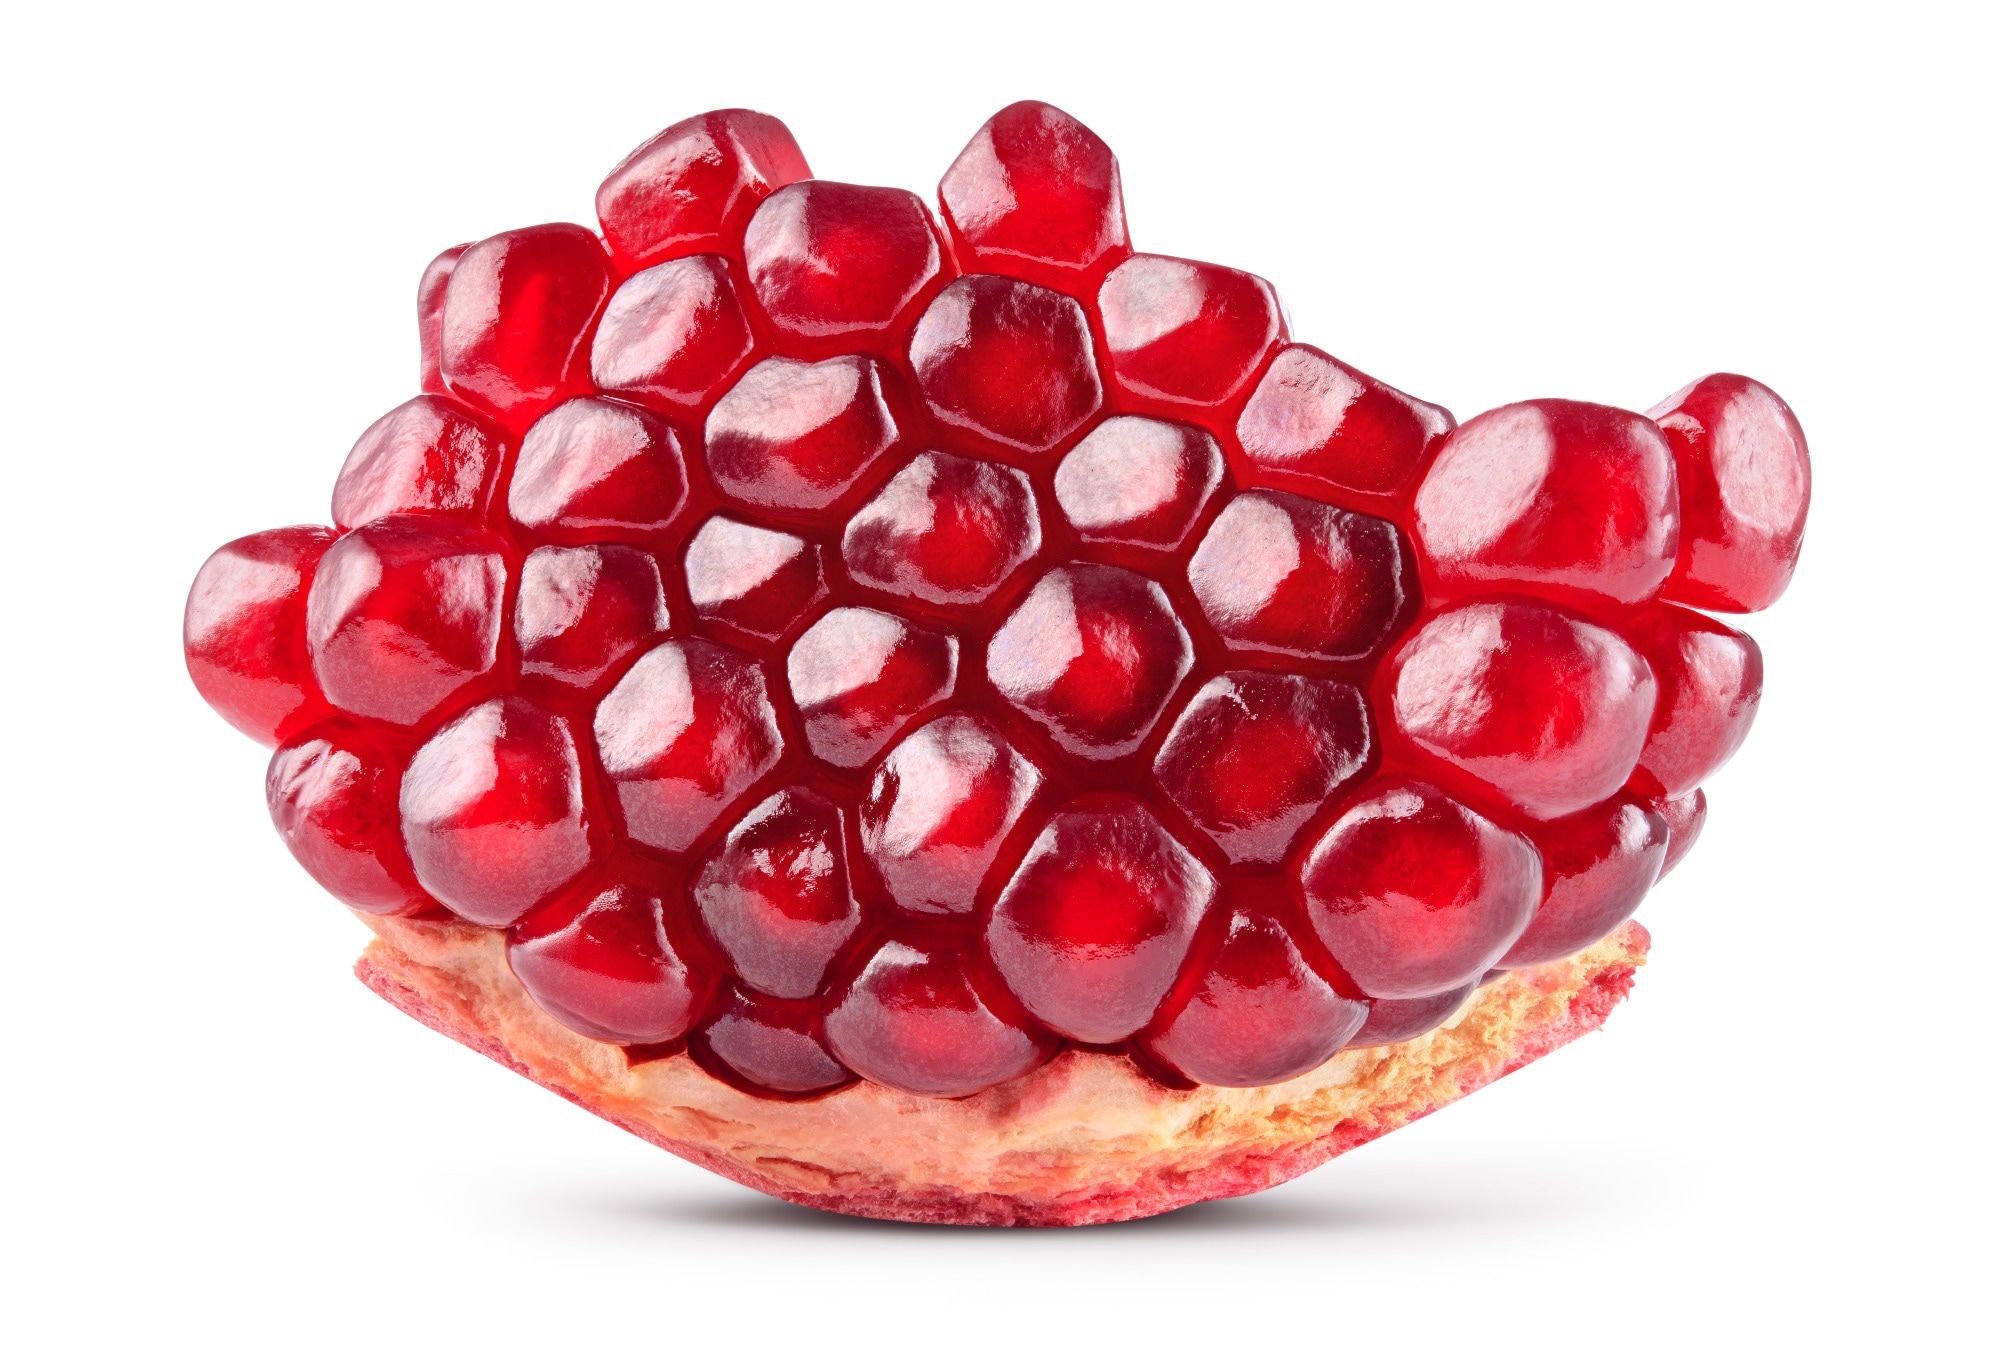 Study: Effect of pomegranate seed oil on mild cognitive impairment.  Image credit: Team UR/Shutterstock